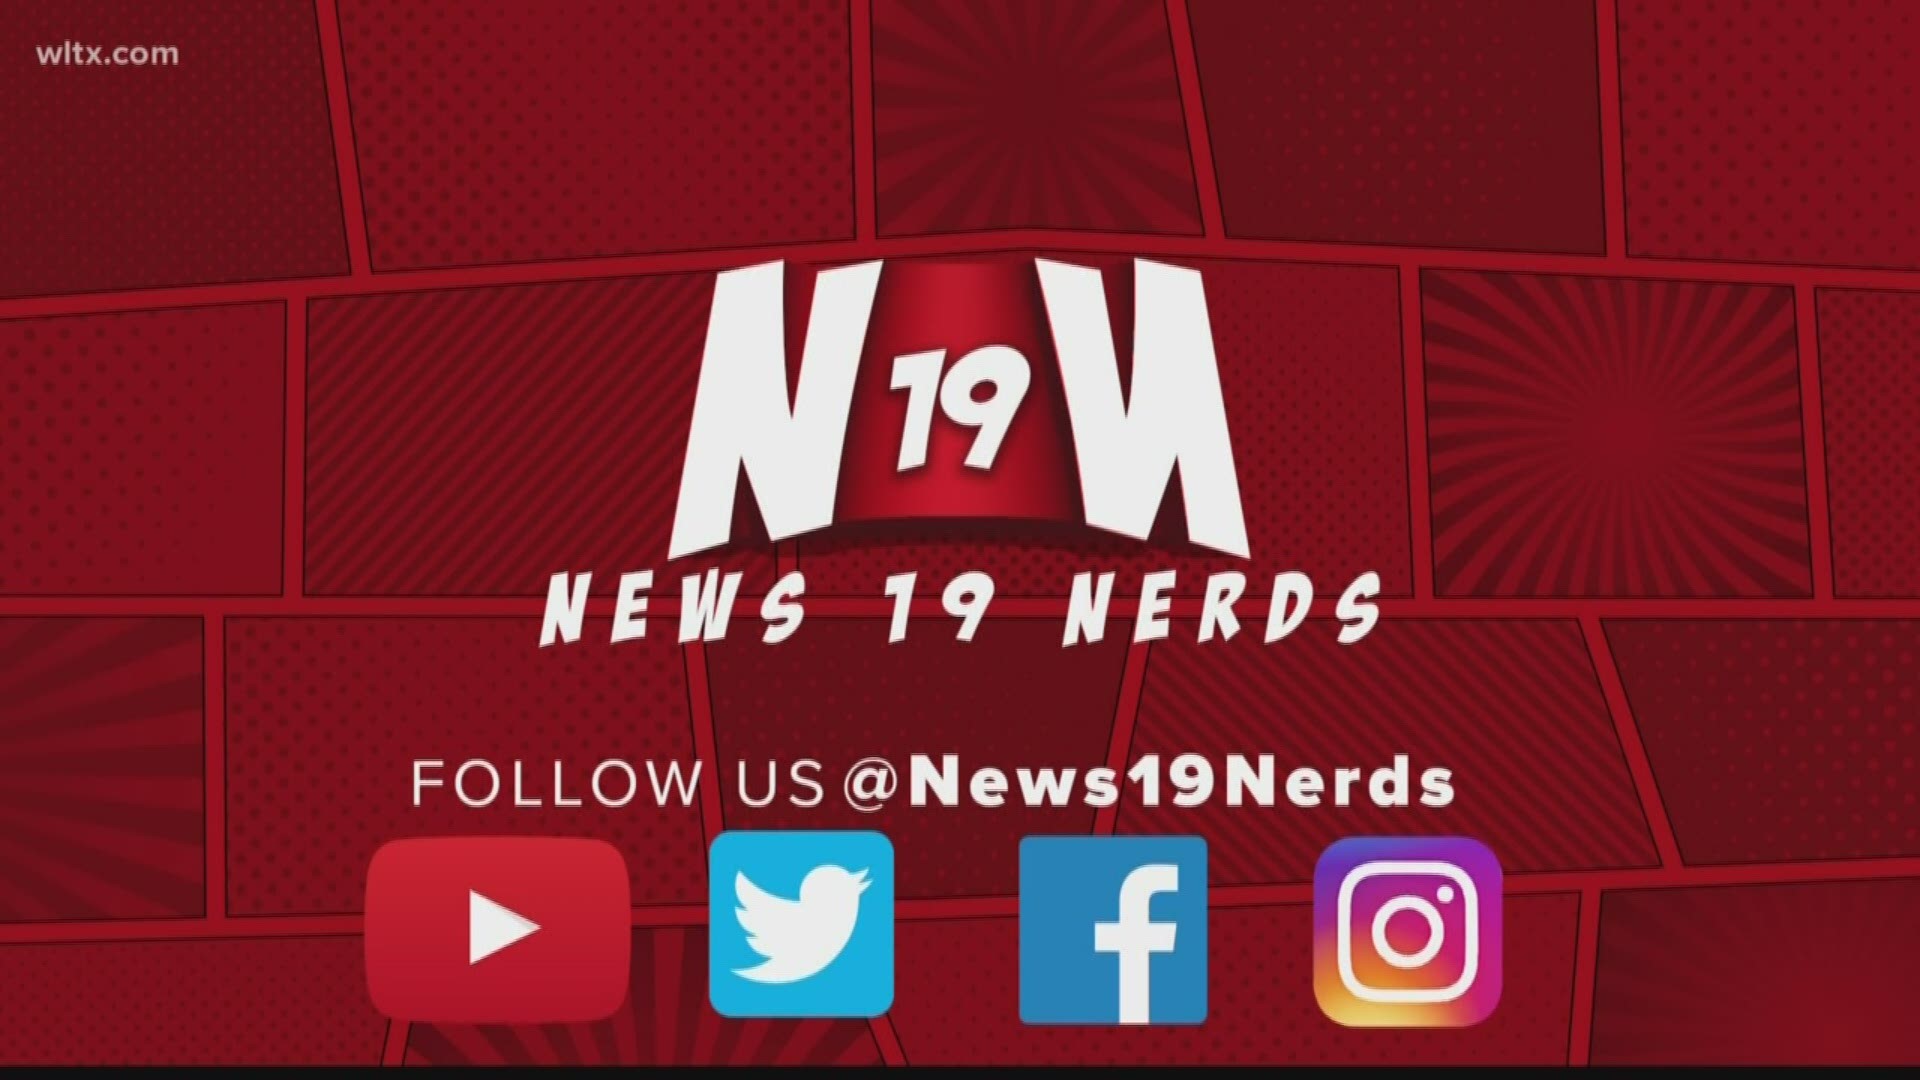 Michael Patterson and Loren Thomas present the latest edition of the News19 Nerds' news round-up on October 18, 2019.